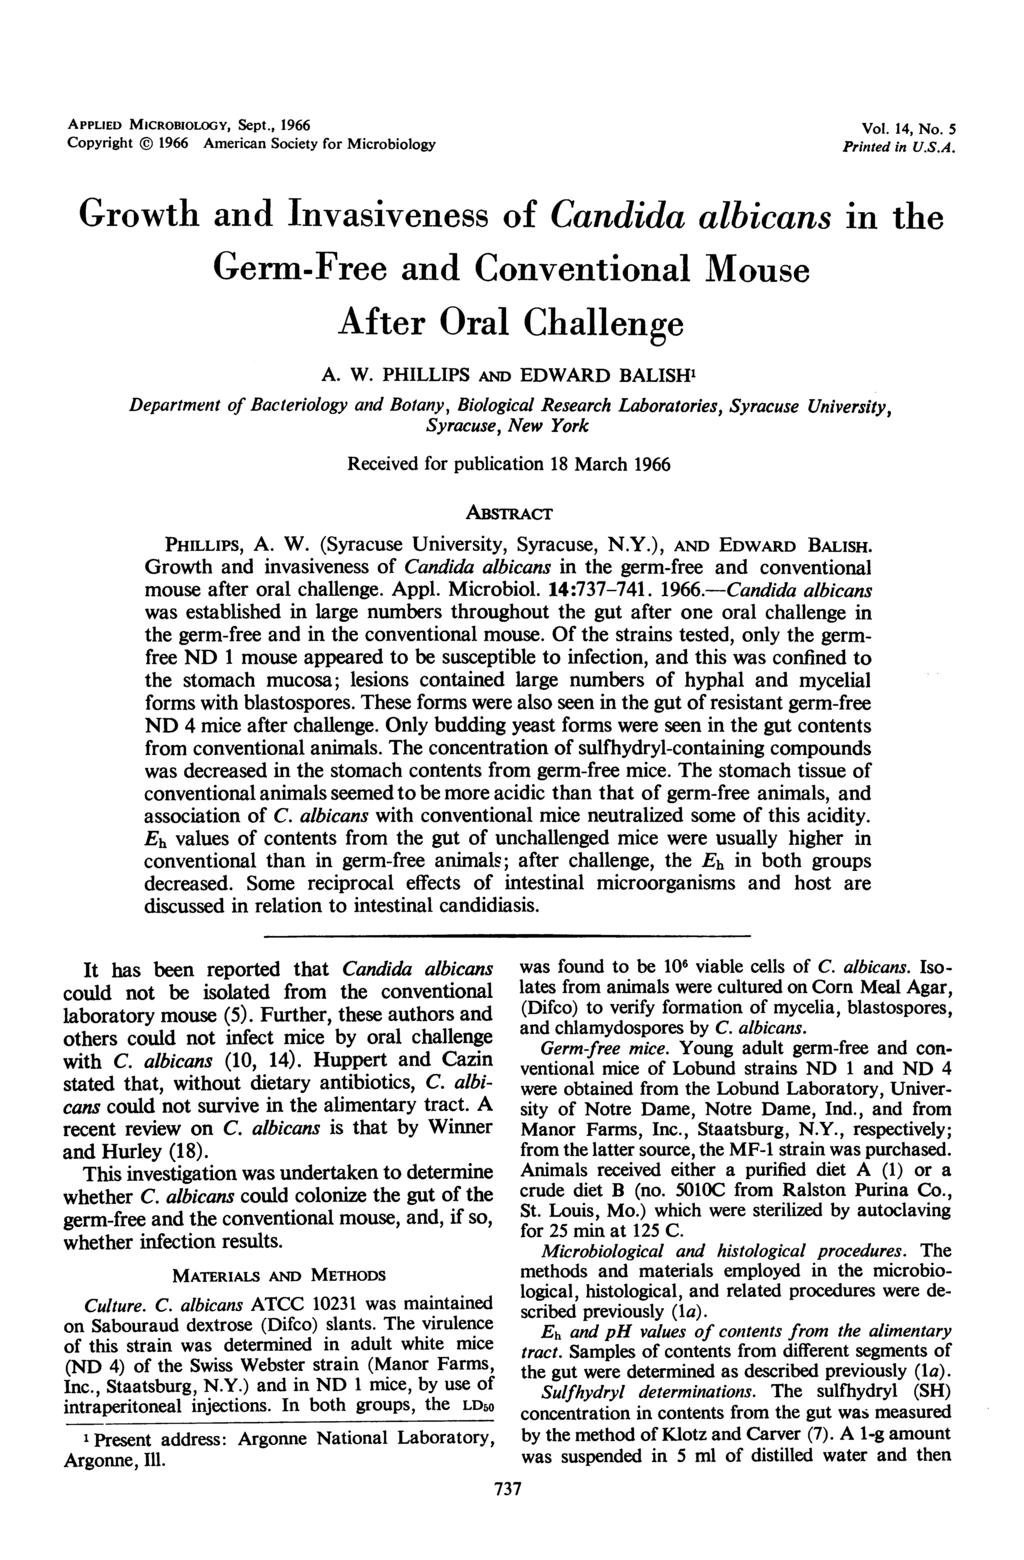 APPLIED MICROBIOLOGY, Sept., 1966 Copyright 1966 American Society for Microbiology Vol. 14, No. 5 Printed in U.S.A. Growth and Invasiveness of Candida albicans in the Germ-Free and Conventional Mouse After Oral Challenge A.